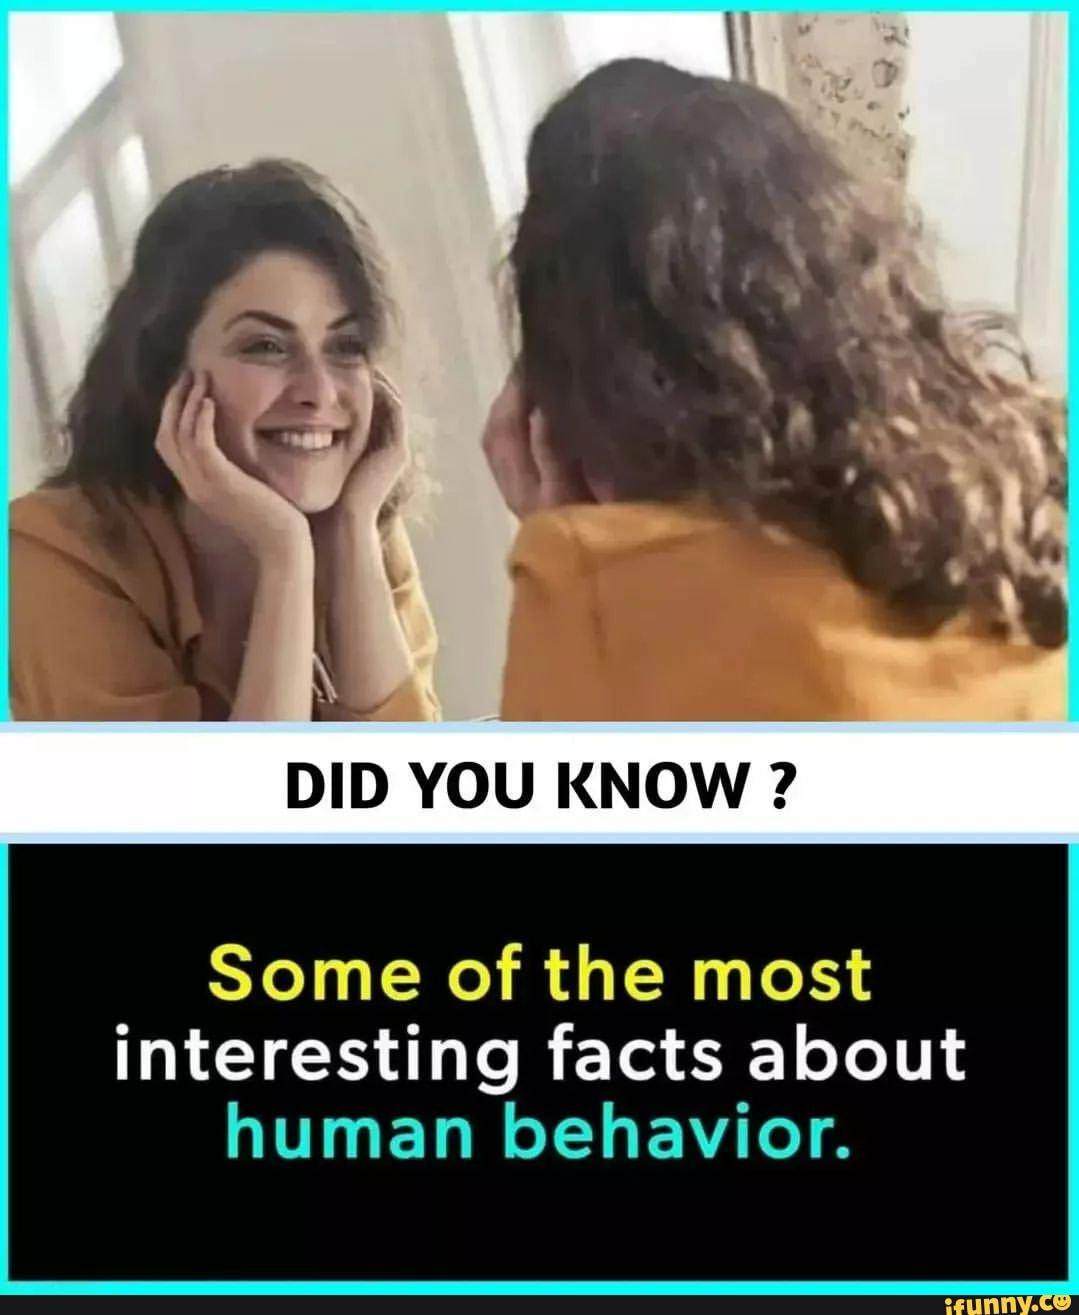 DID YOU KNOW ? Some of the most interesting facts about human behavior ...